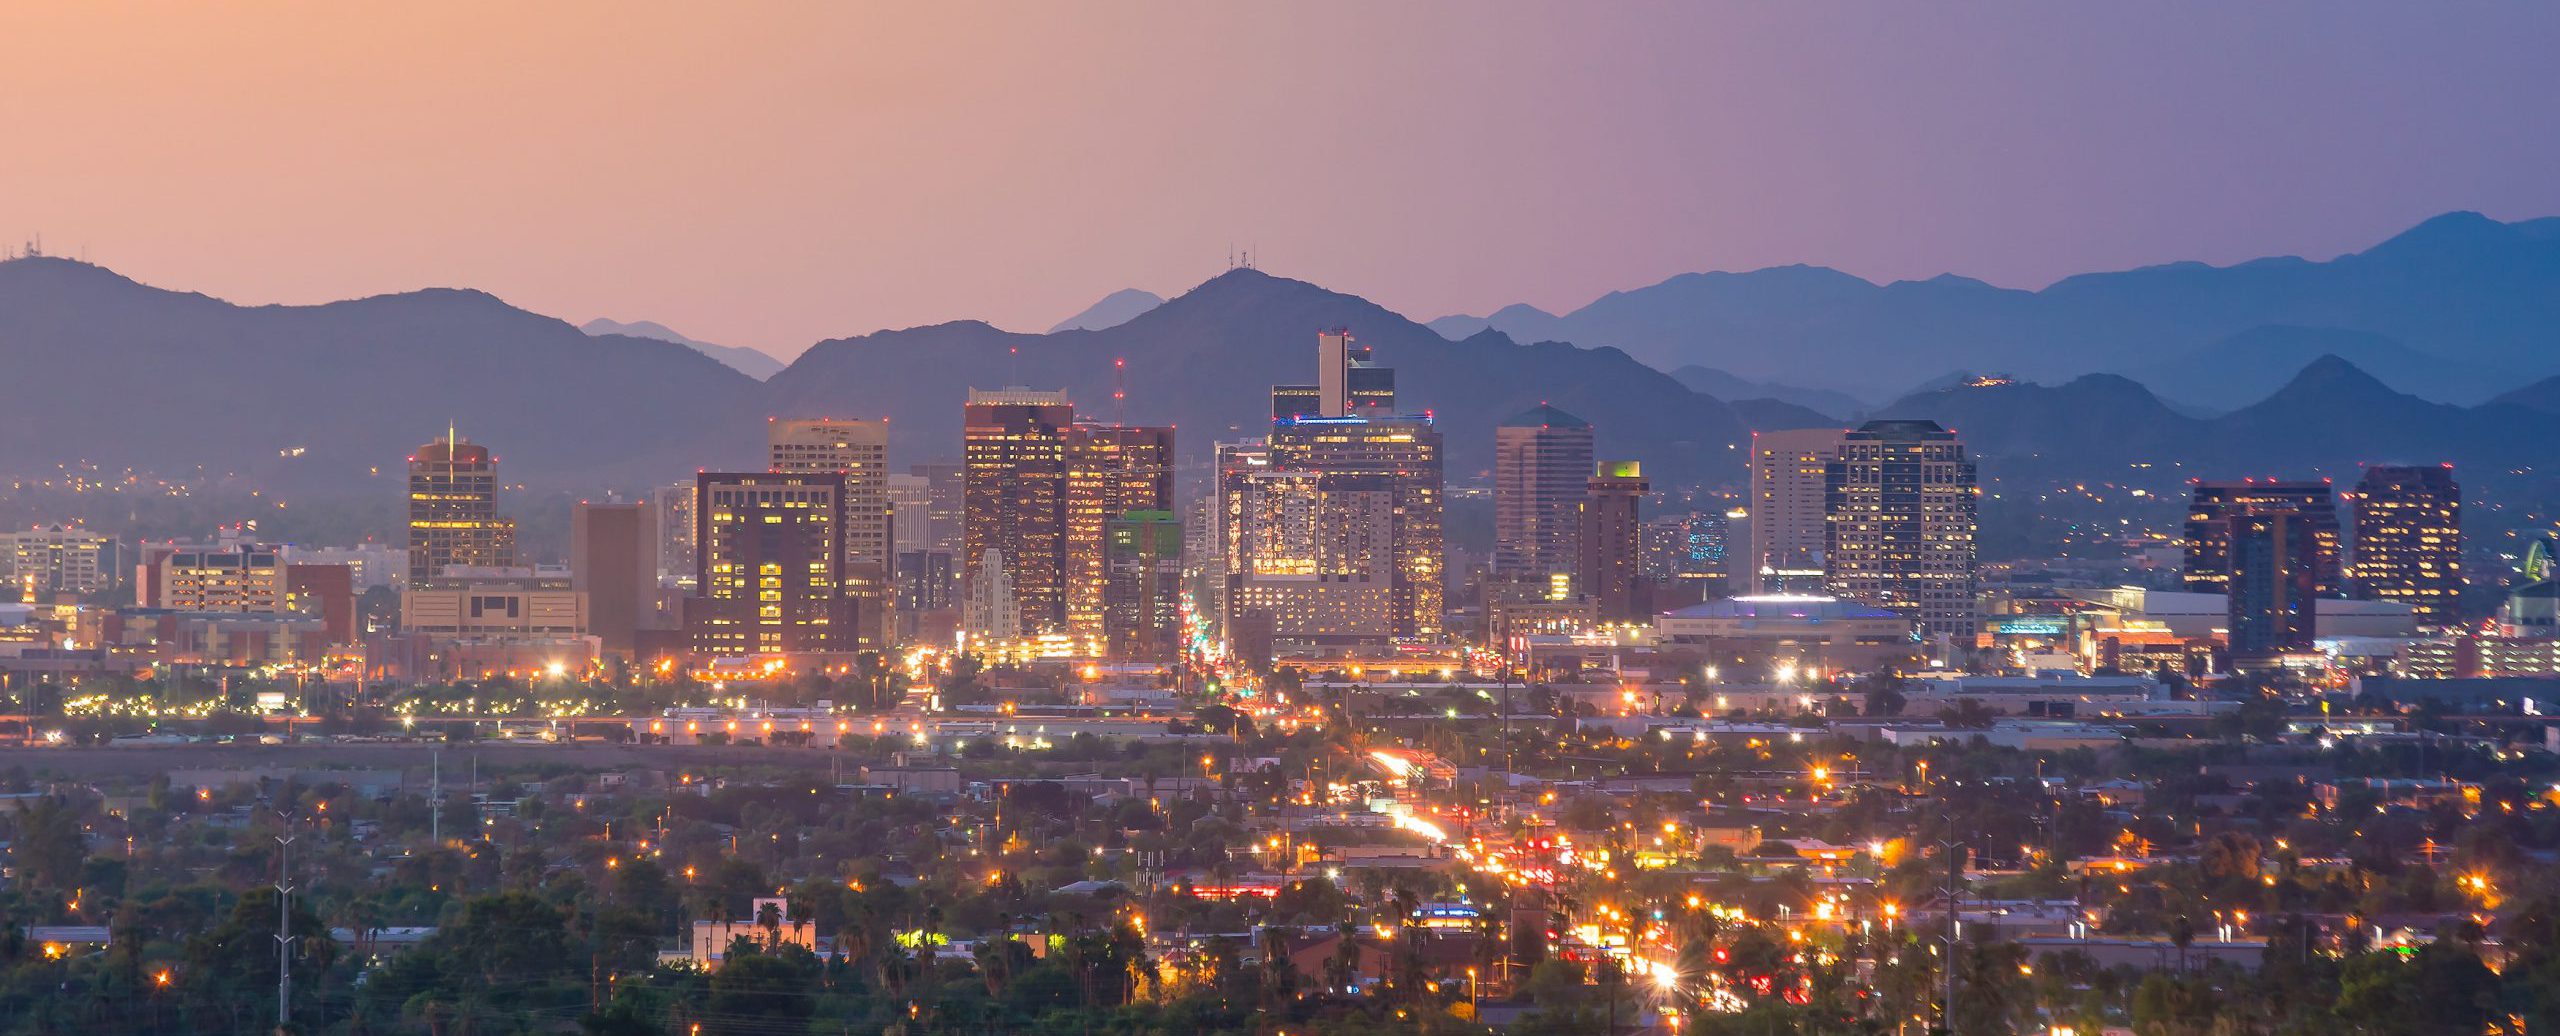 A wide panoramic shot of downtown Phoenix and the local mountains at sunset.